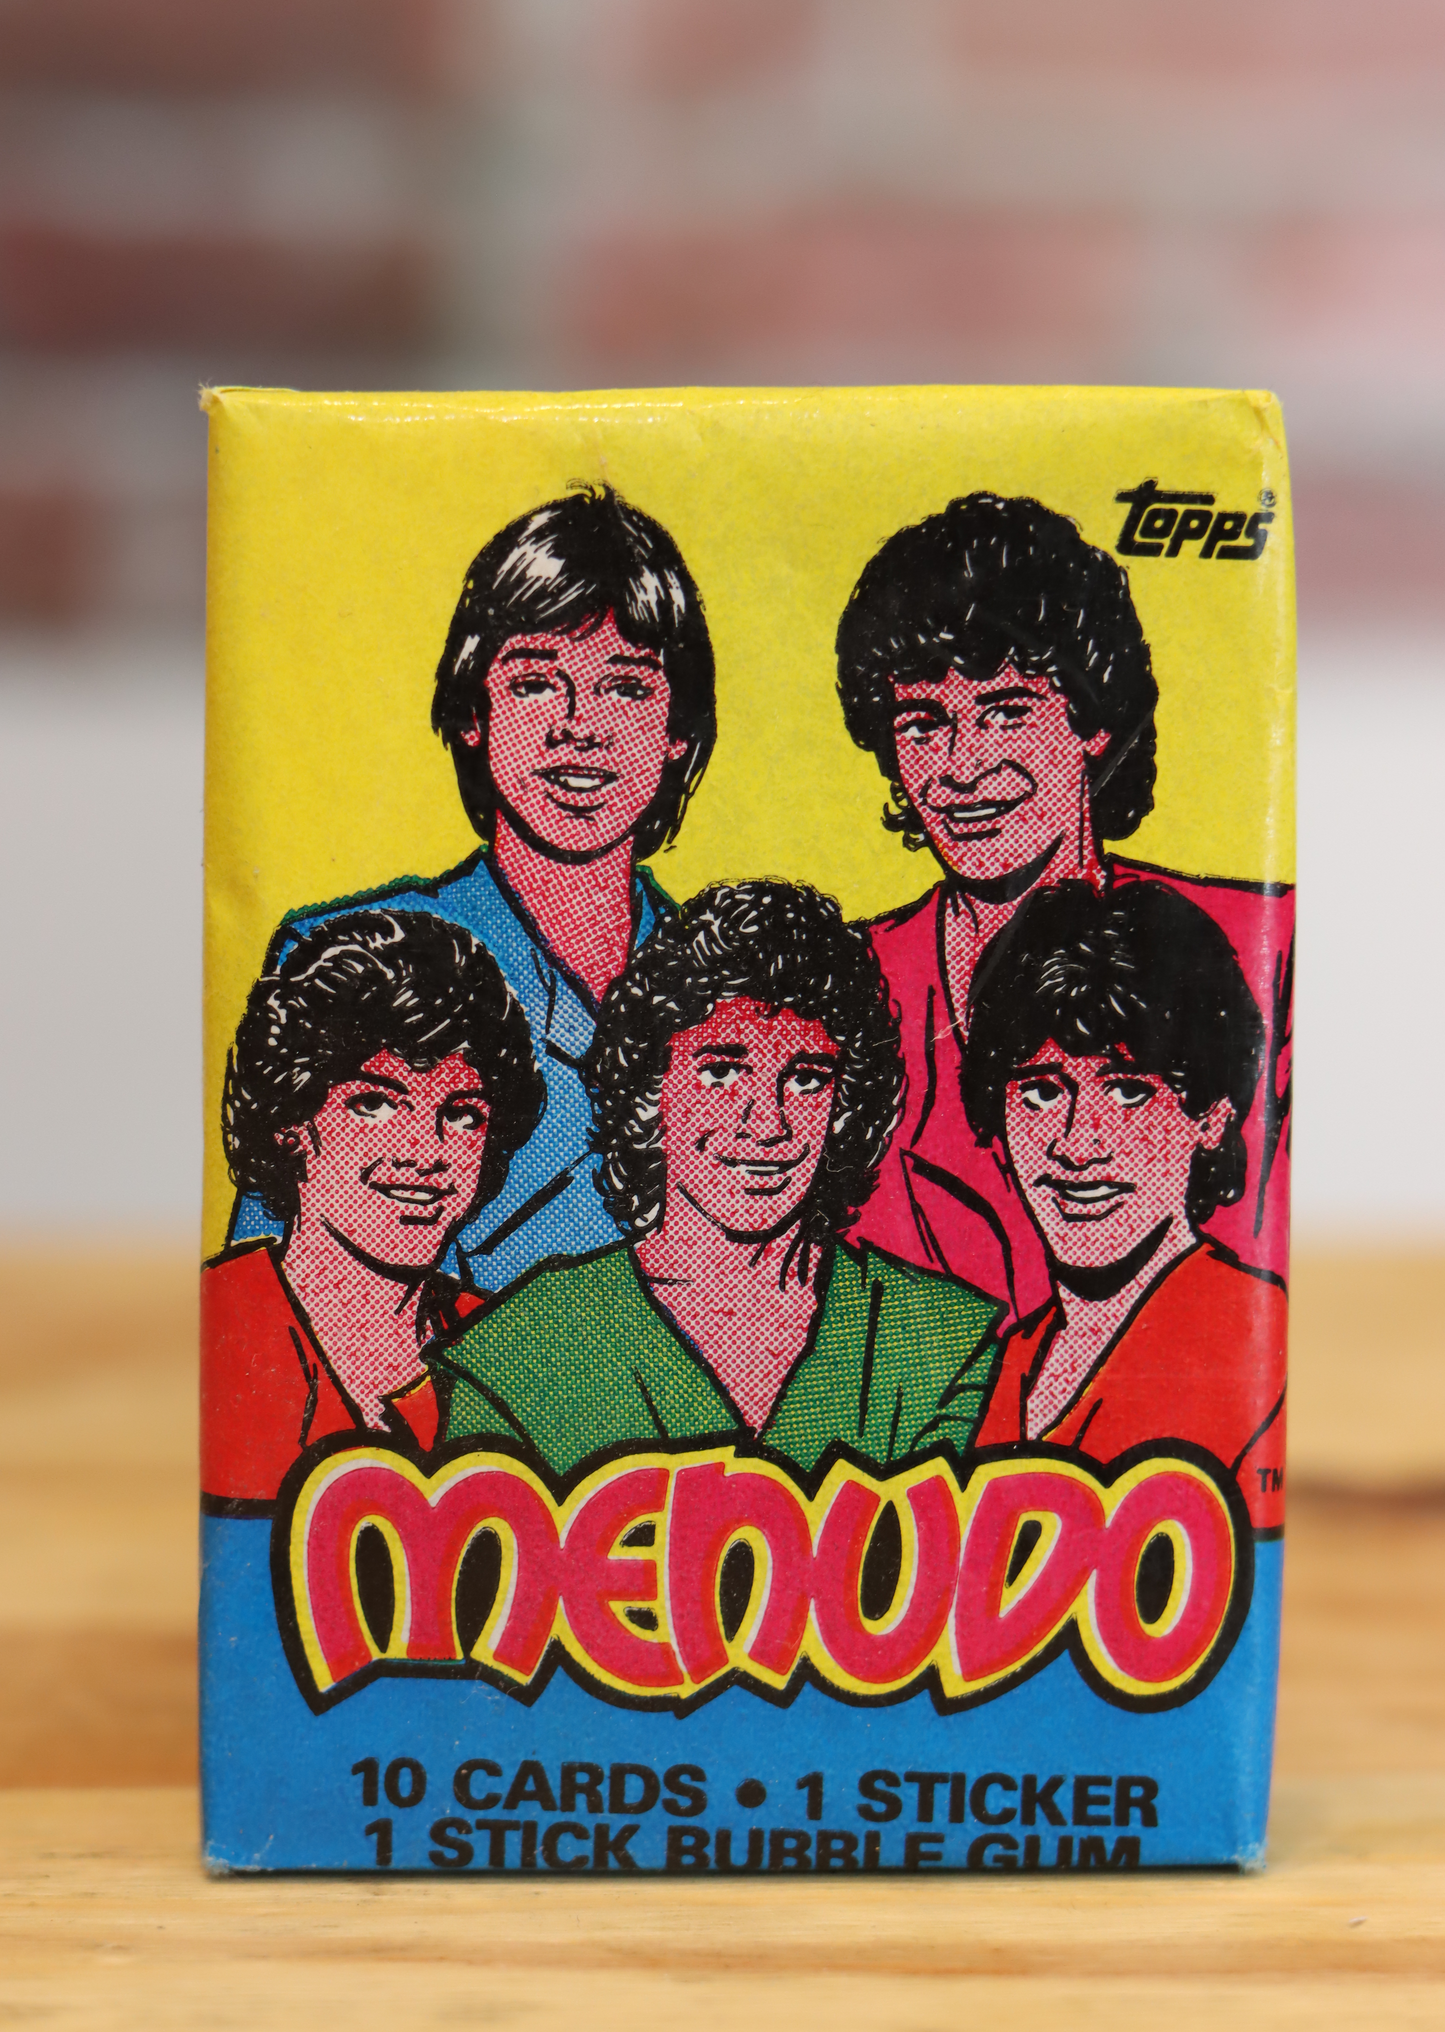 1983 Menudo Music Trading Photo Cards Wax Pack